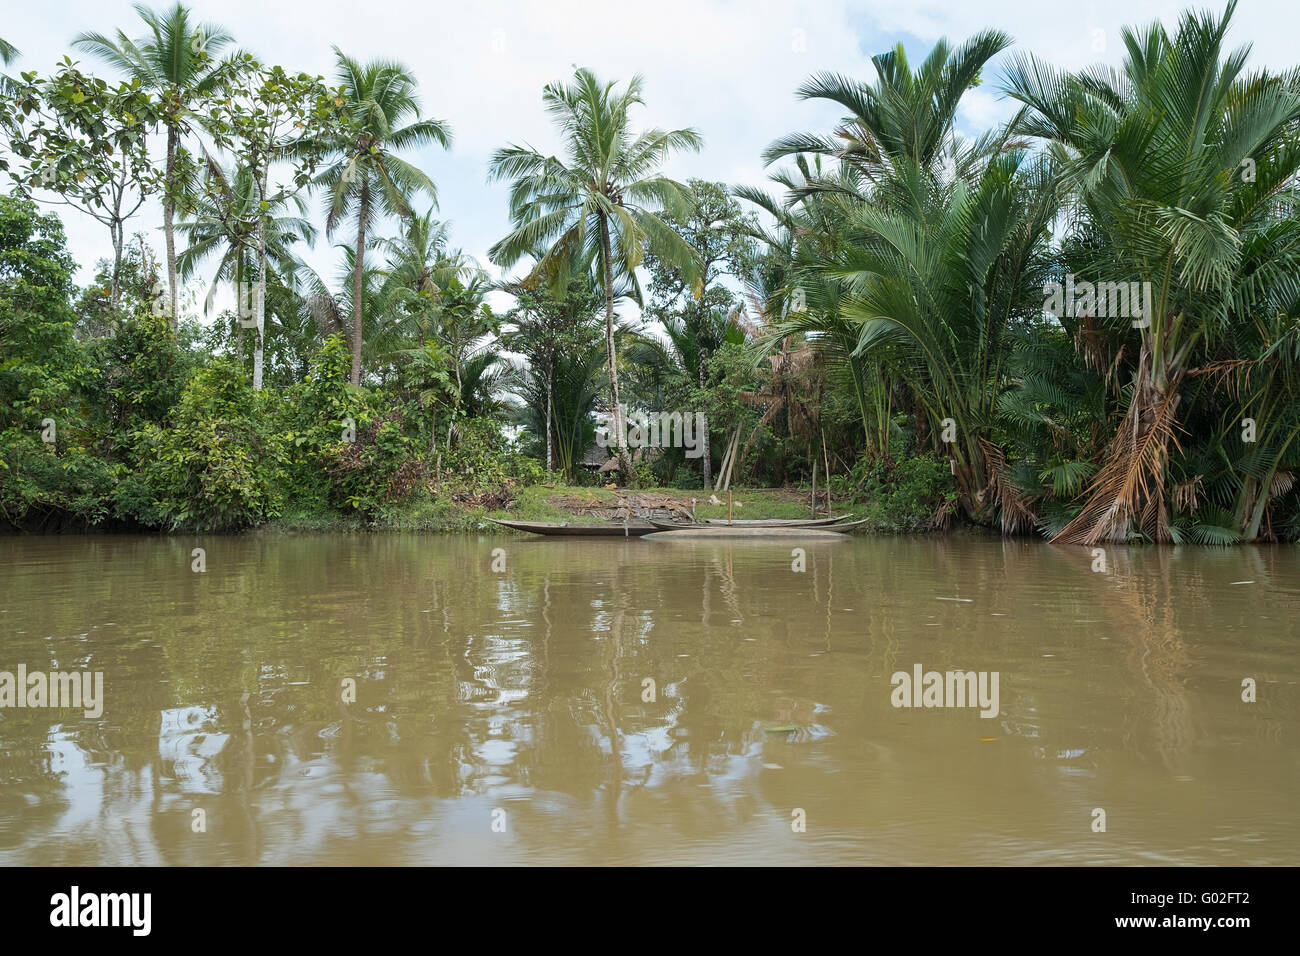 The village and the house of Mentawai tribe. Stock Photo